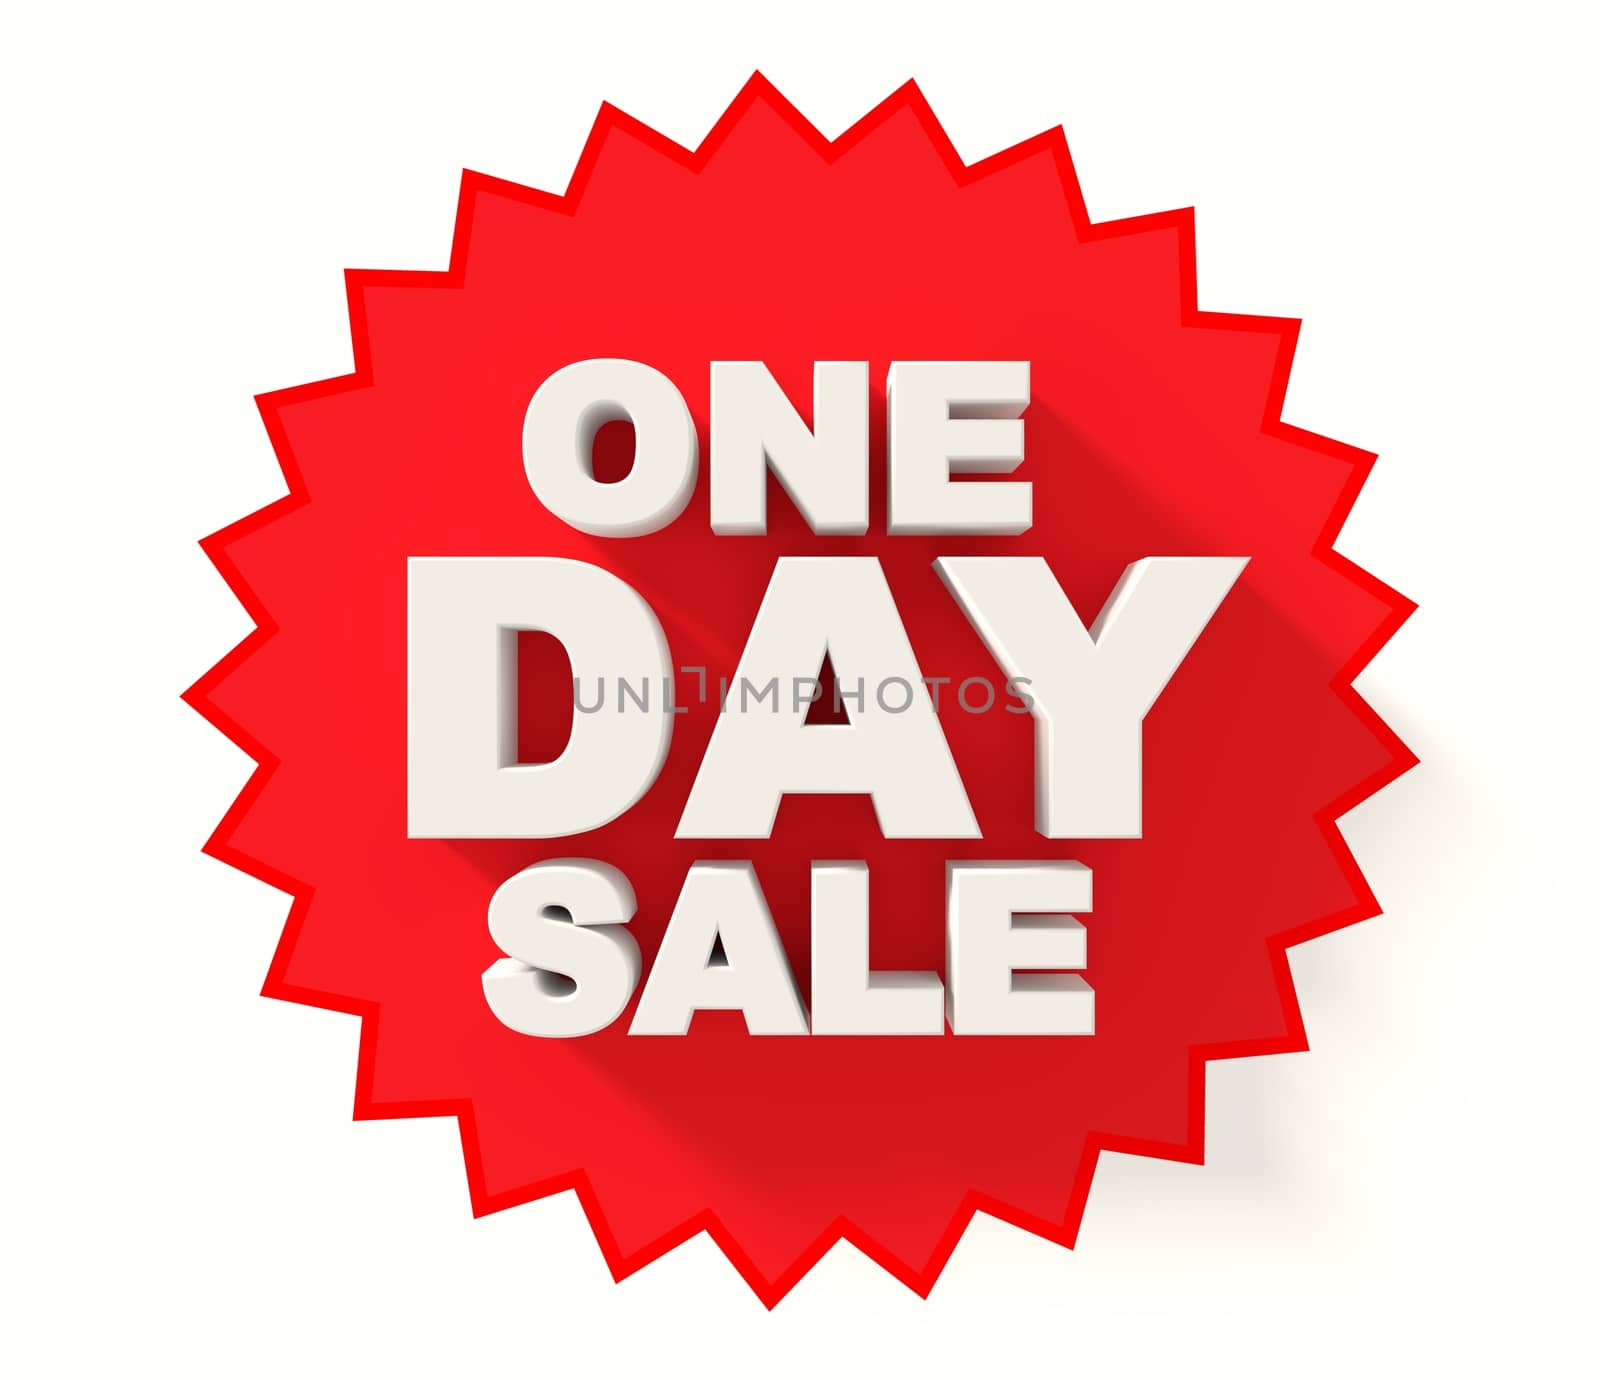 One day sale sign white, letters on red star background